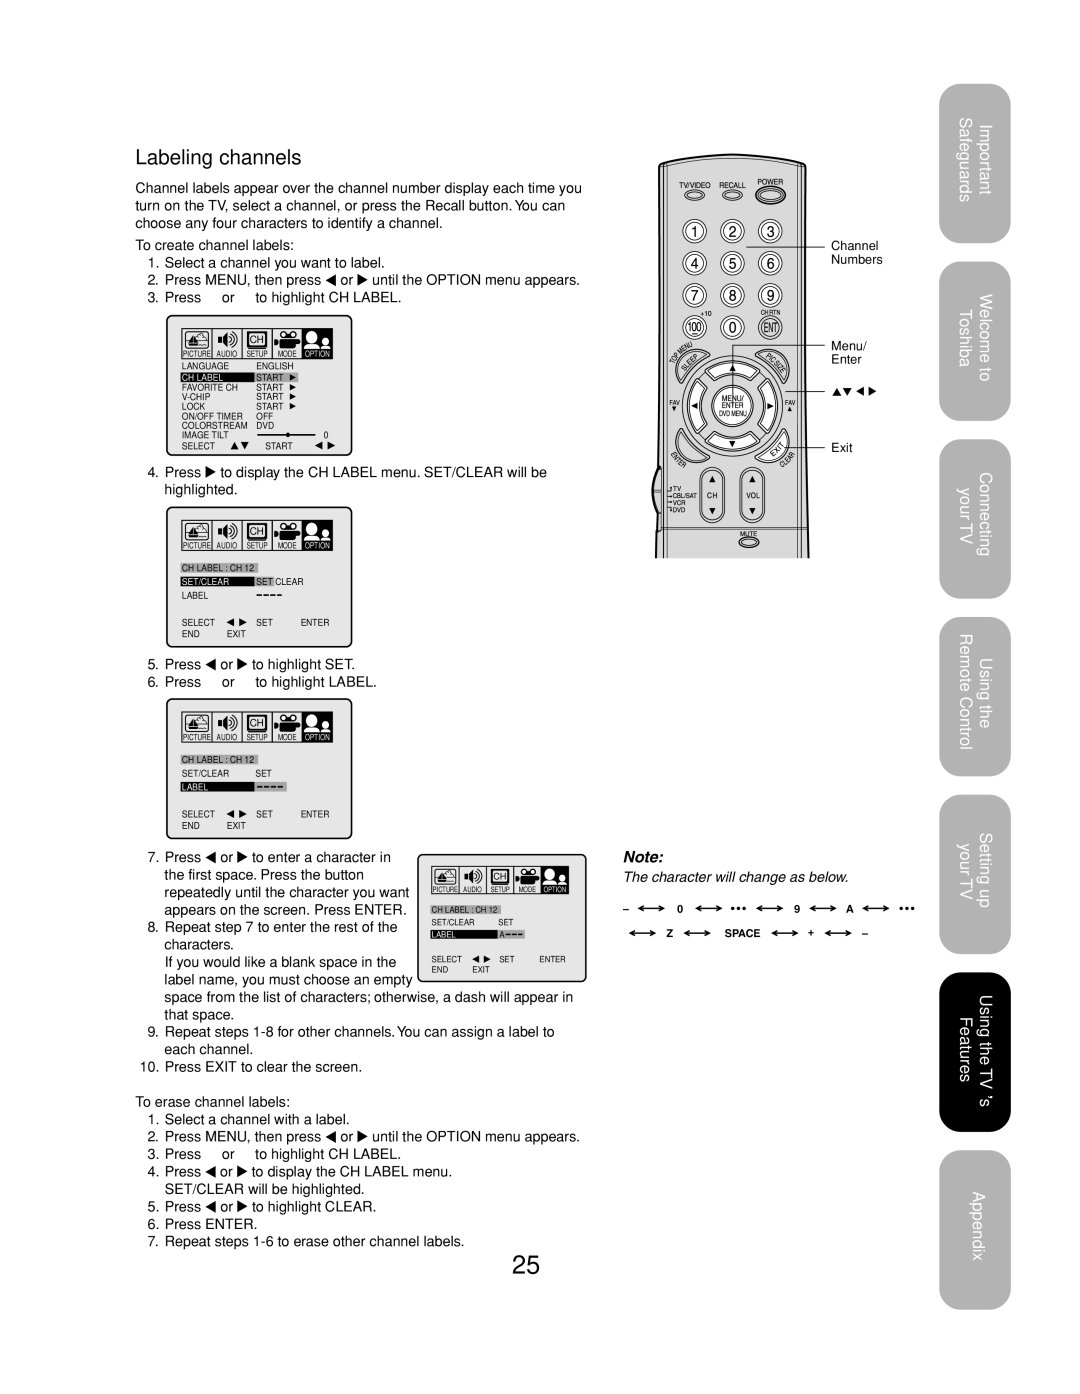 Toshiba 27AF53 appendix Labeling channels, To create channel labels, Repeat to enter the rest, To erase channel labels 